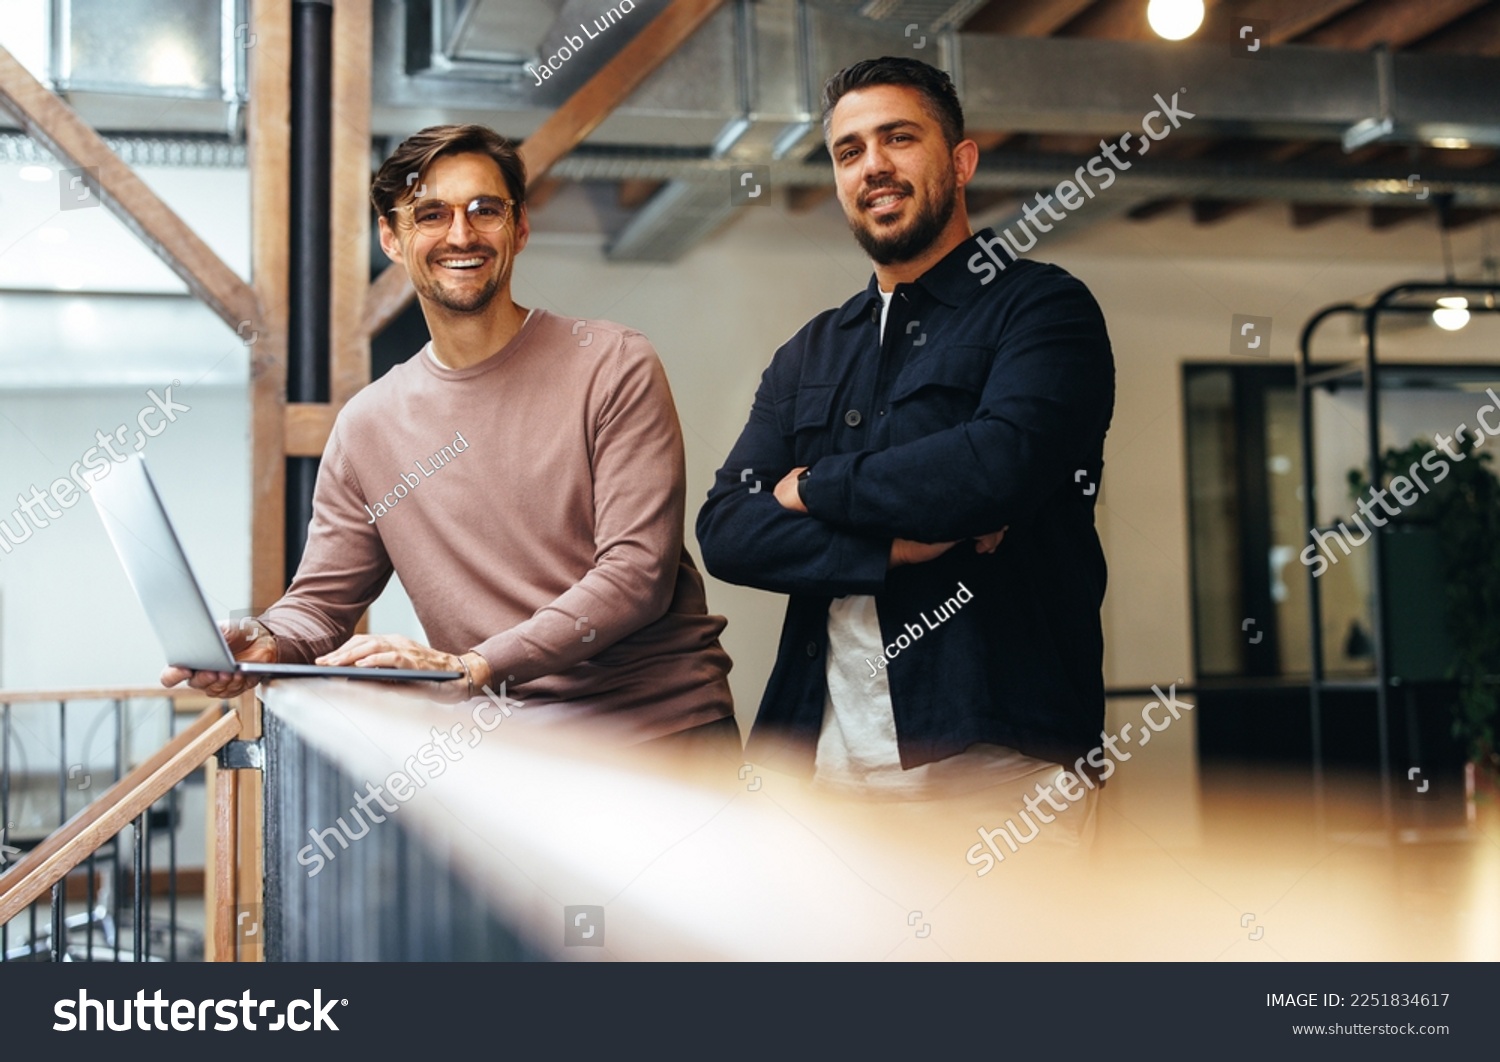 Male business professionals standing on an interior balcony and looking at the camera. Two business men working together in a tech startup. #2251834617